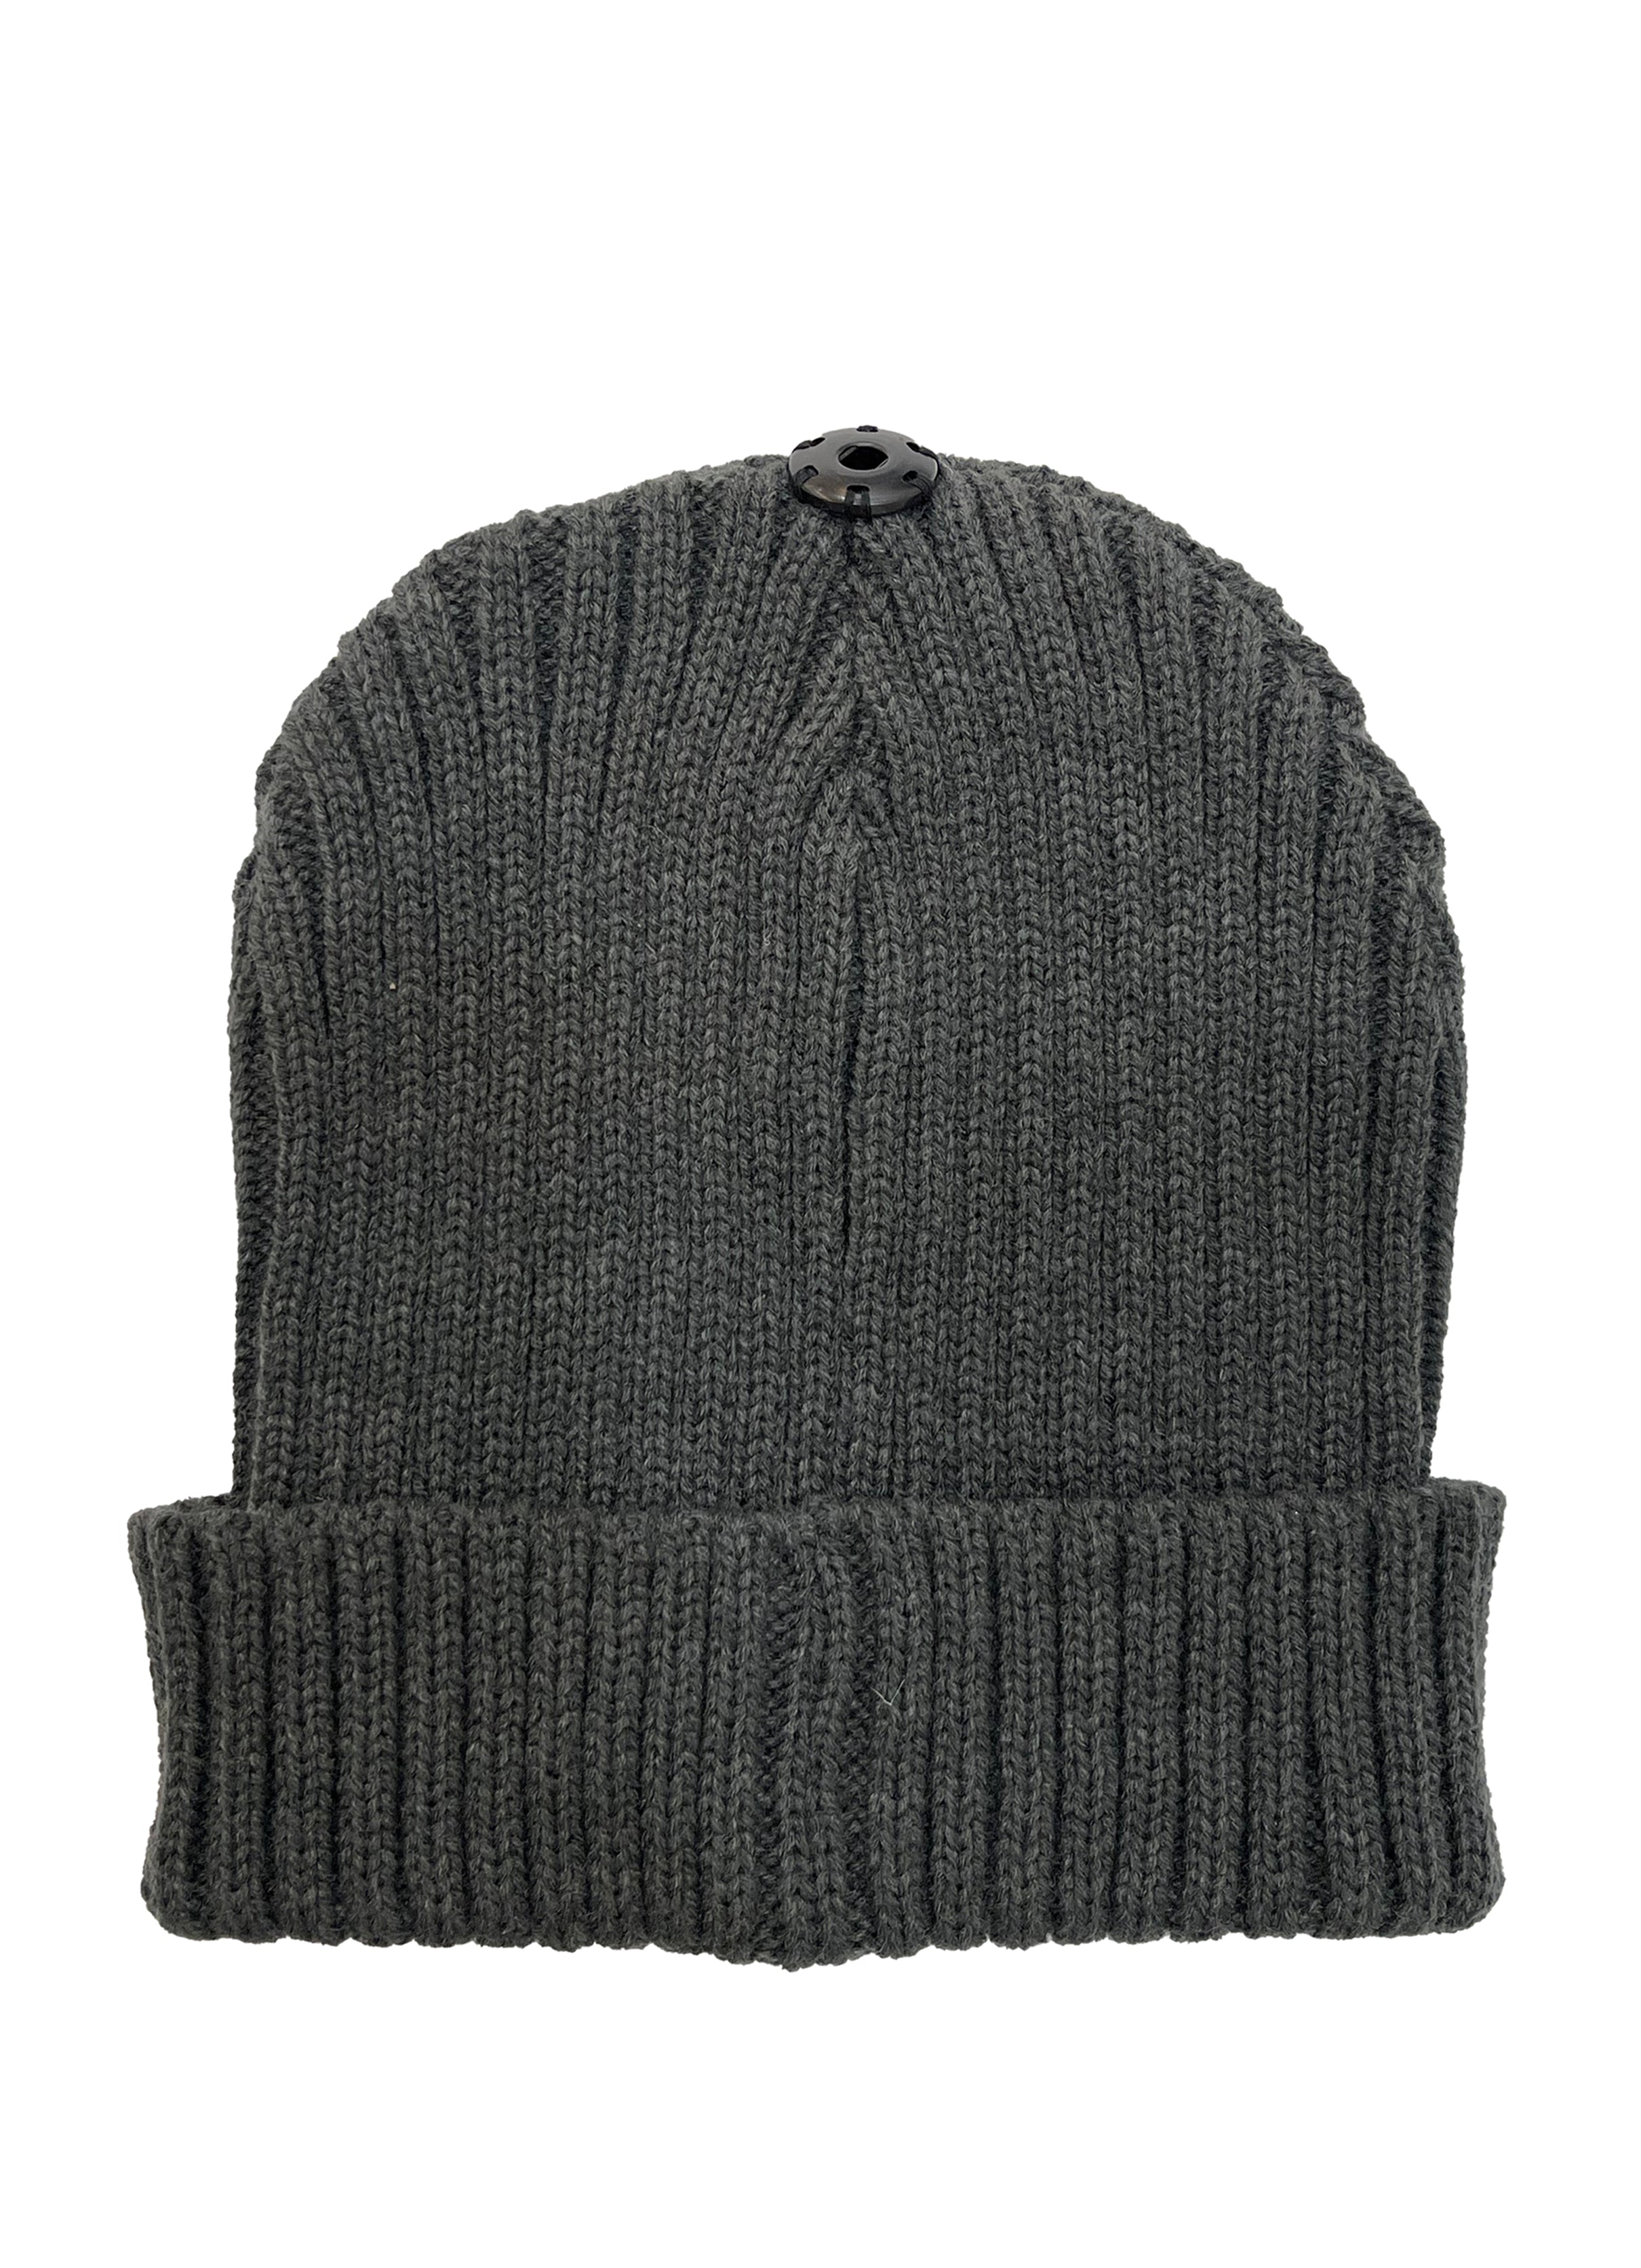 The Pom Hat - Charcoal/Charcoal